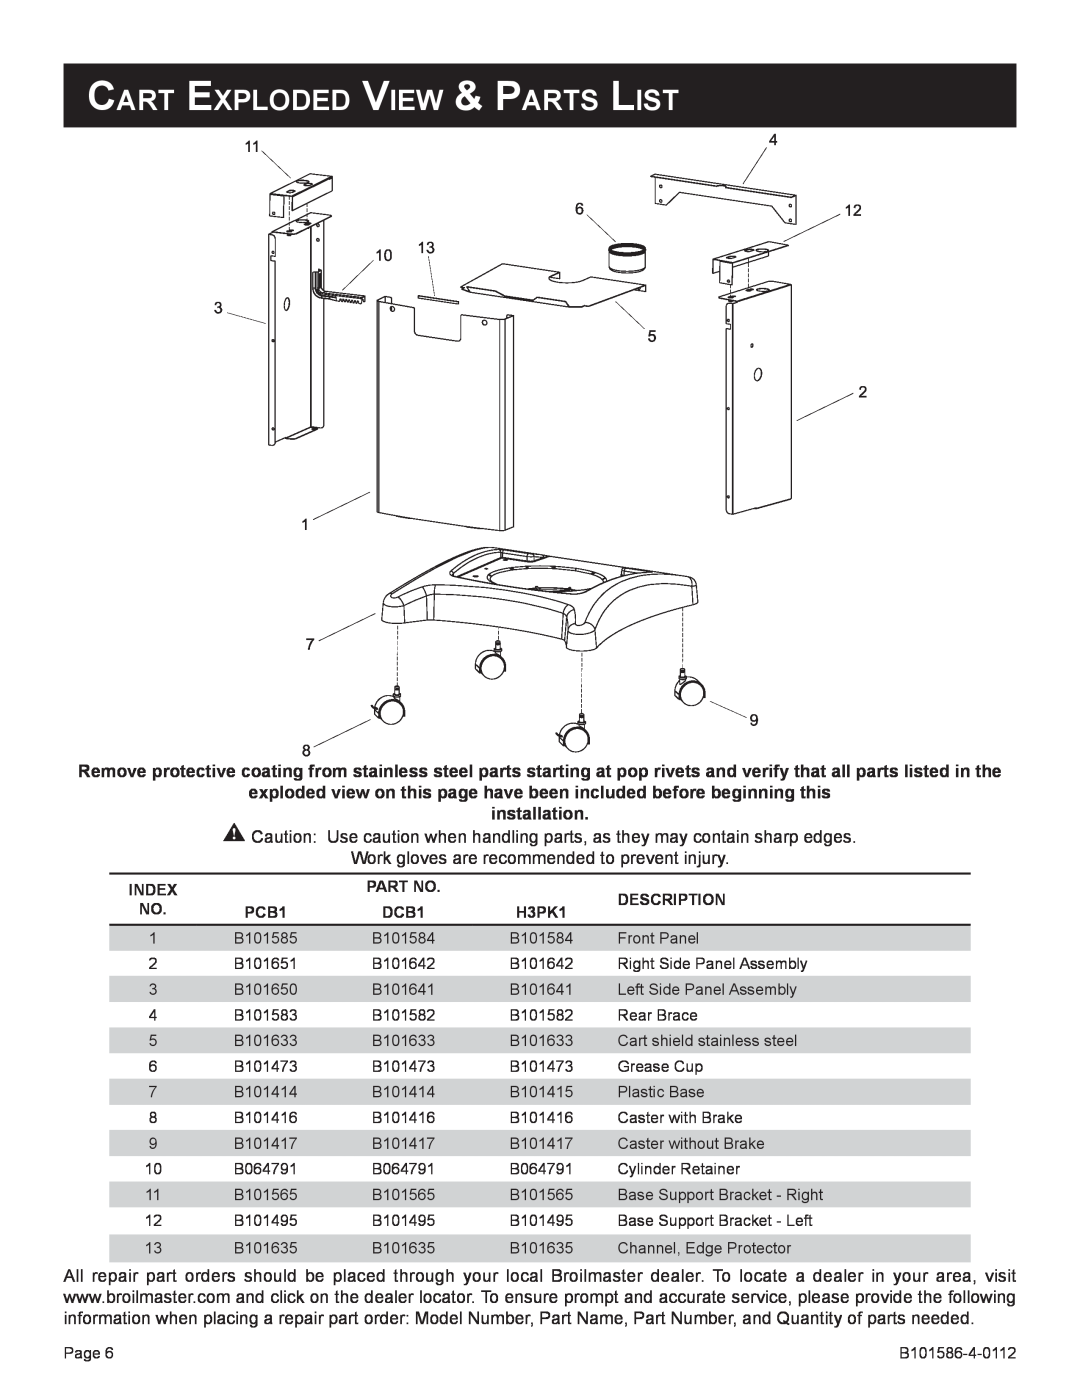 Broilmaster B101652 Cart Exploded View & Parts List, exploded view on this page have been included before beginning this 